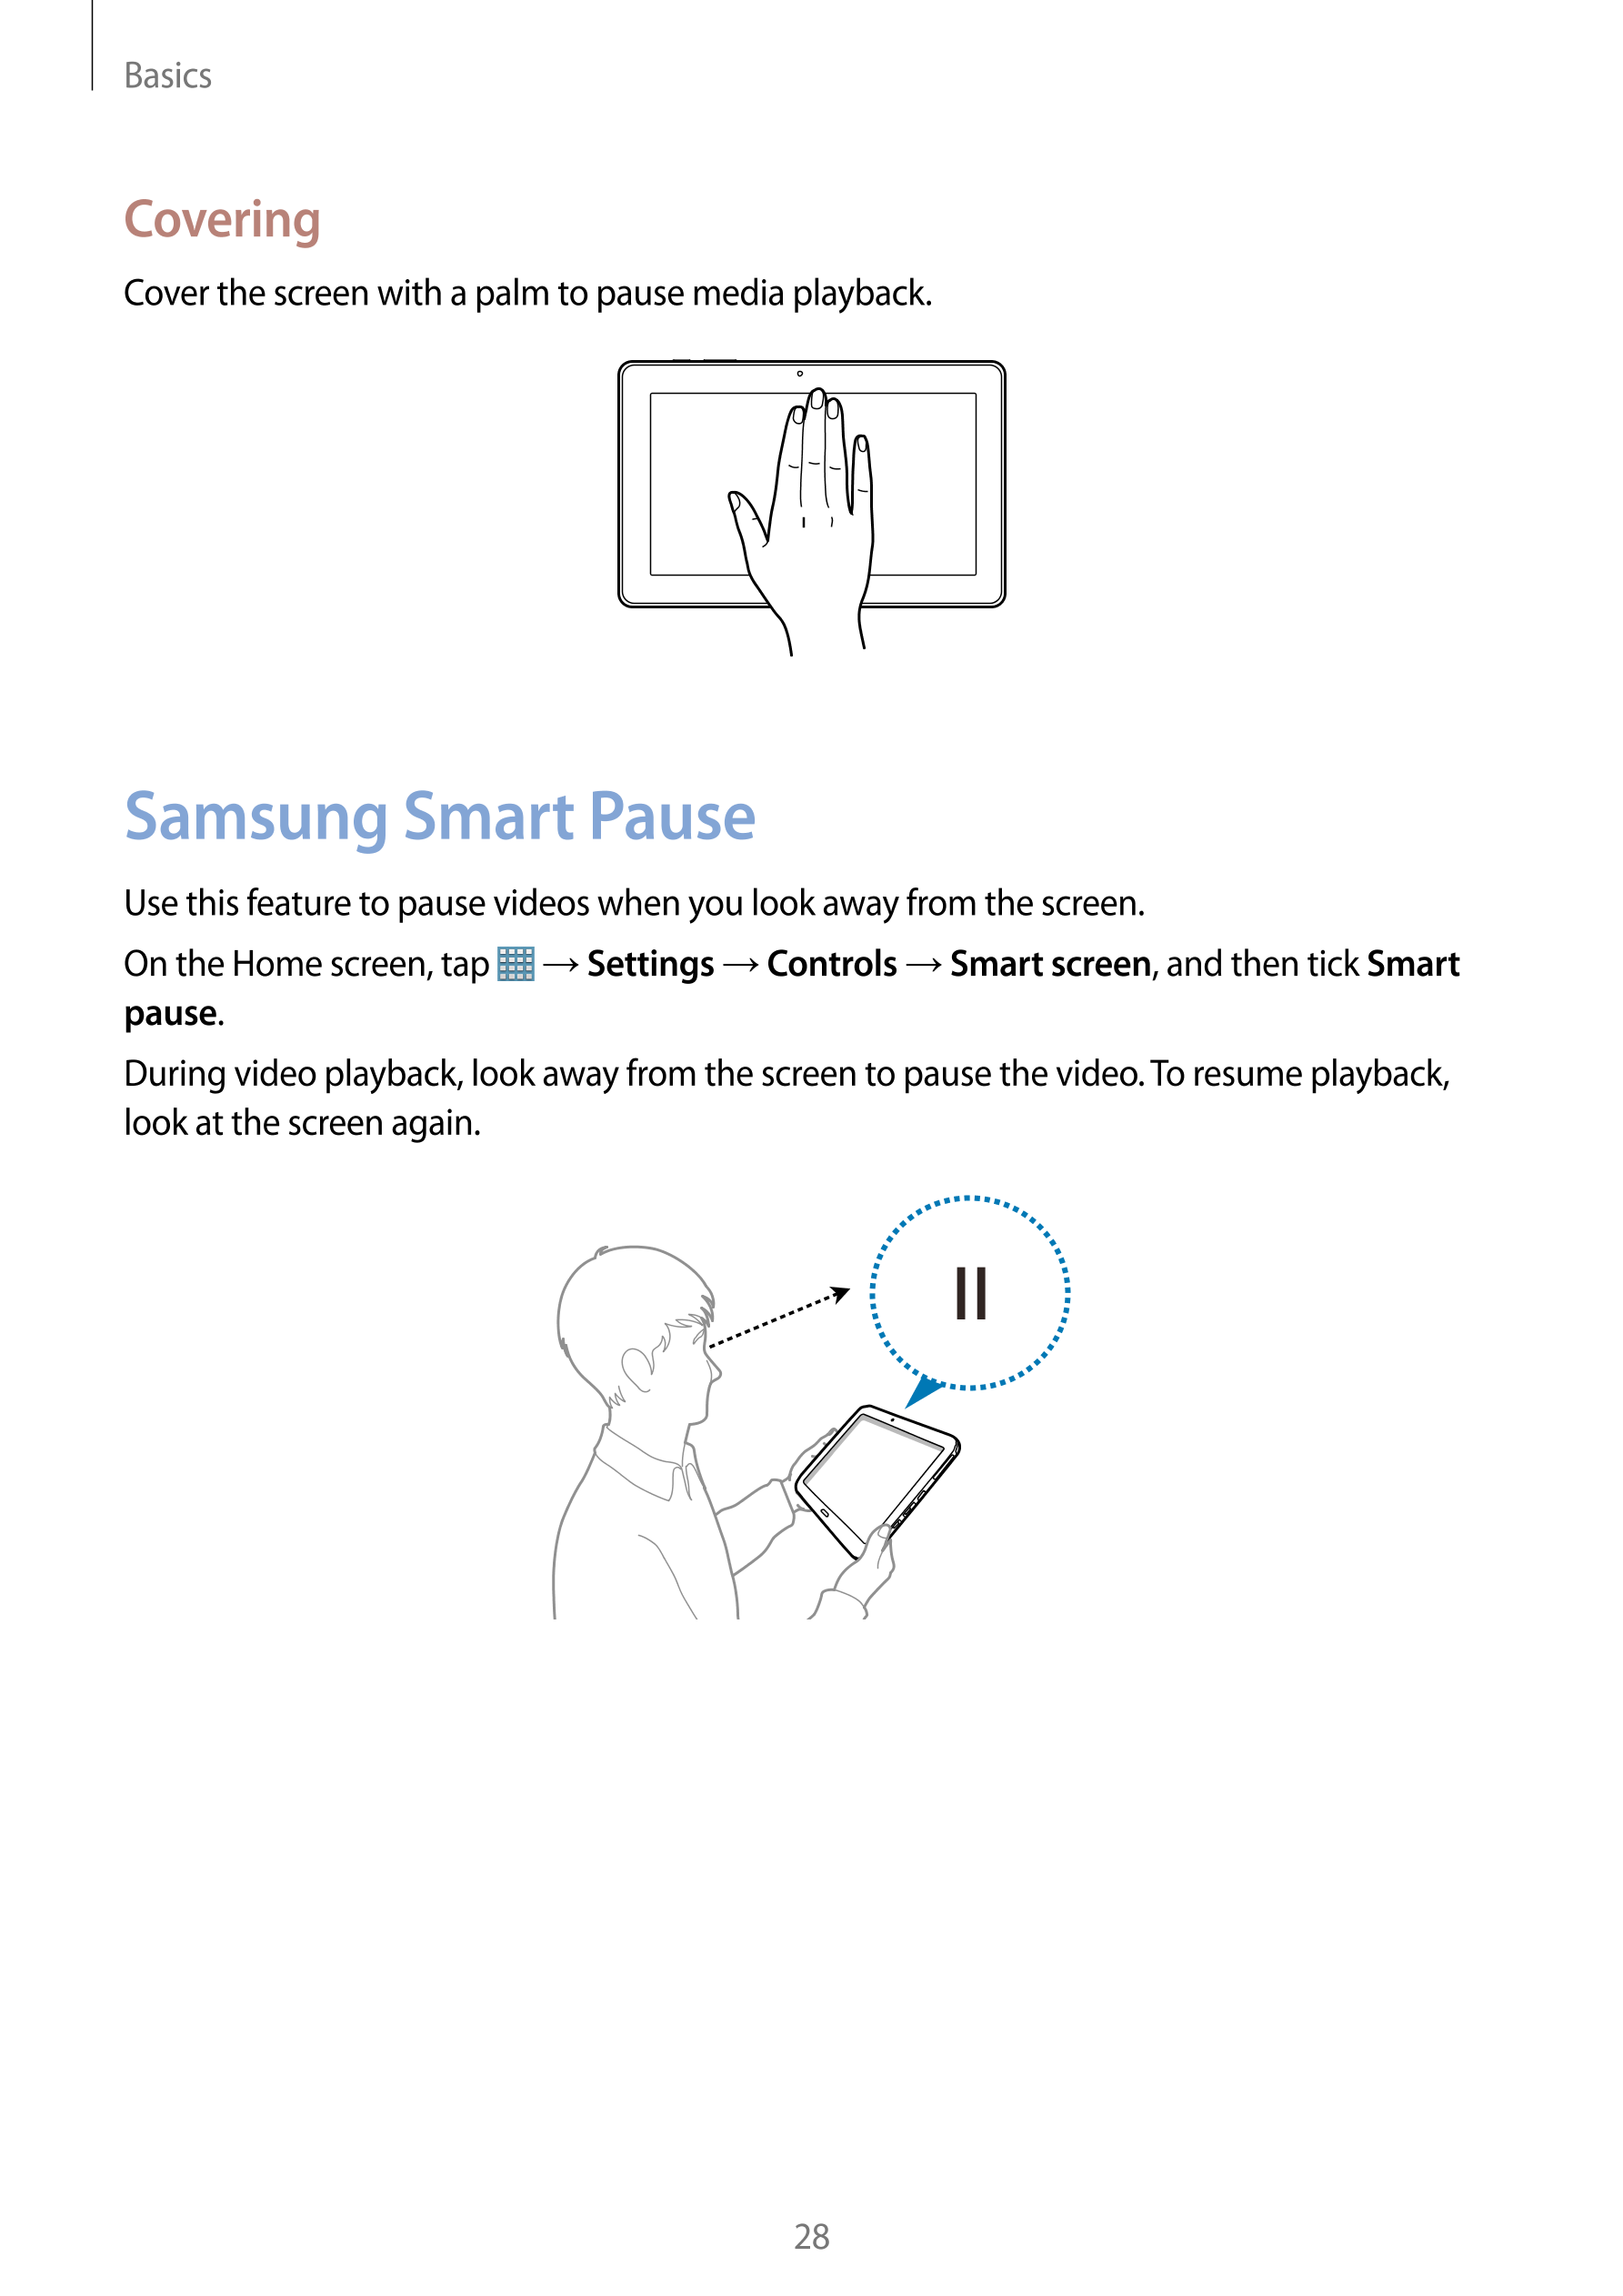 Basics
Covering
Cover the screen with a palm to pause media playback.
Samsung Smart Pause
Use this feature to pause videos when 